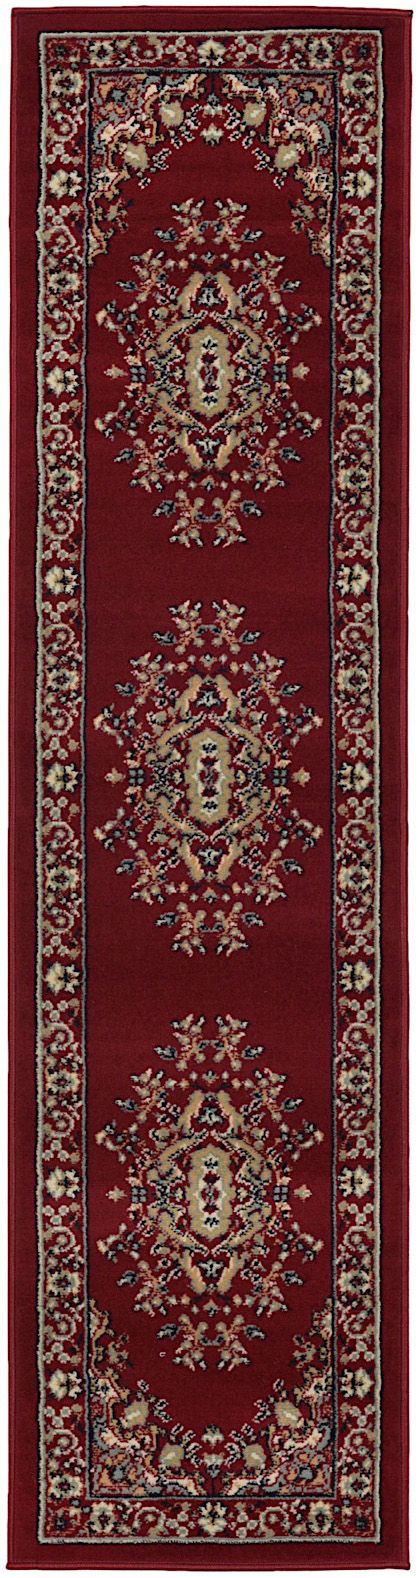 trans ocean meteor traditional area rug collection